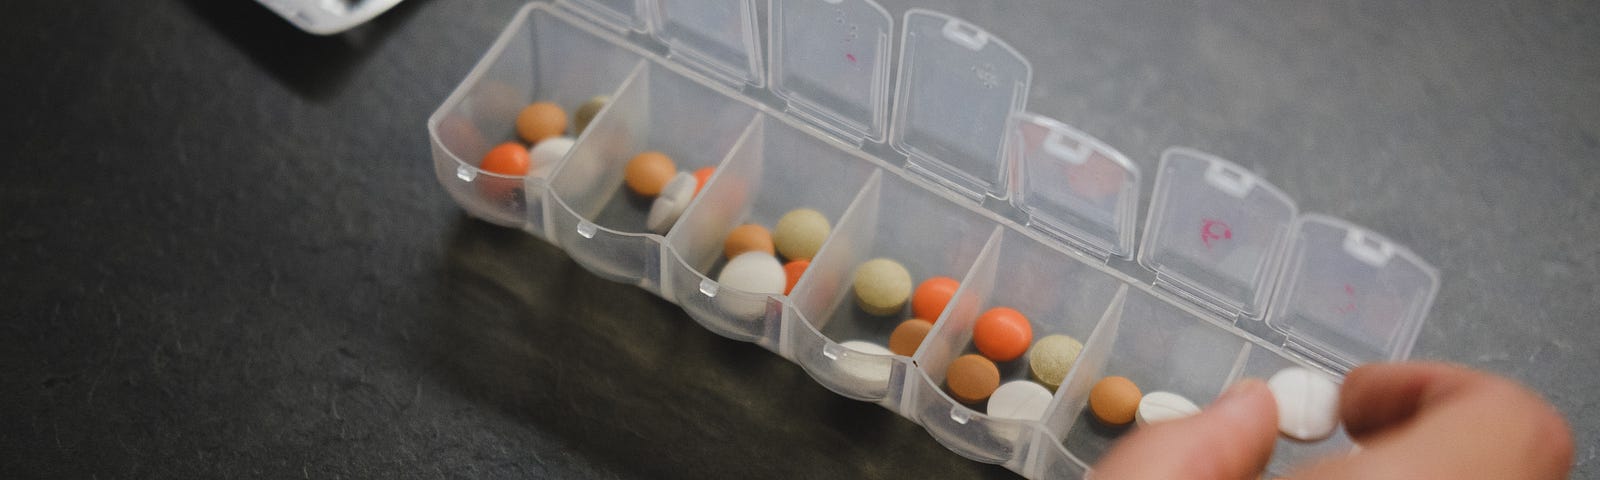 photo of a hand placing a pill into a plastic weekly pill organizer.